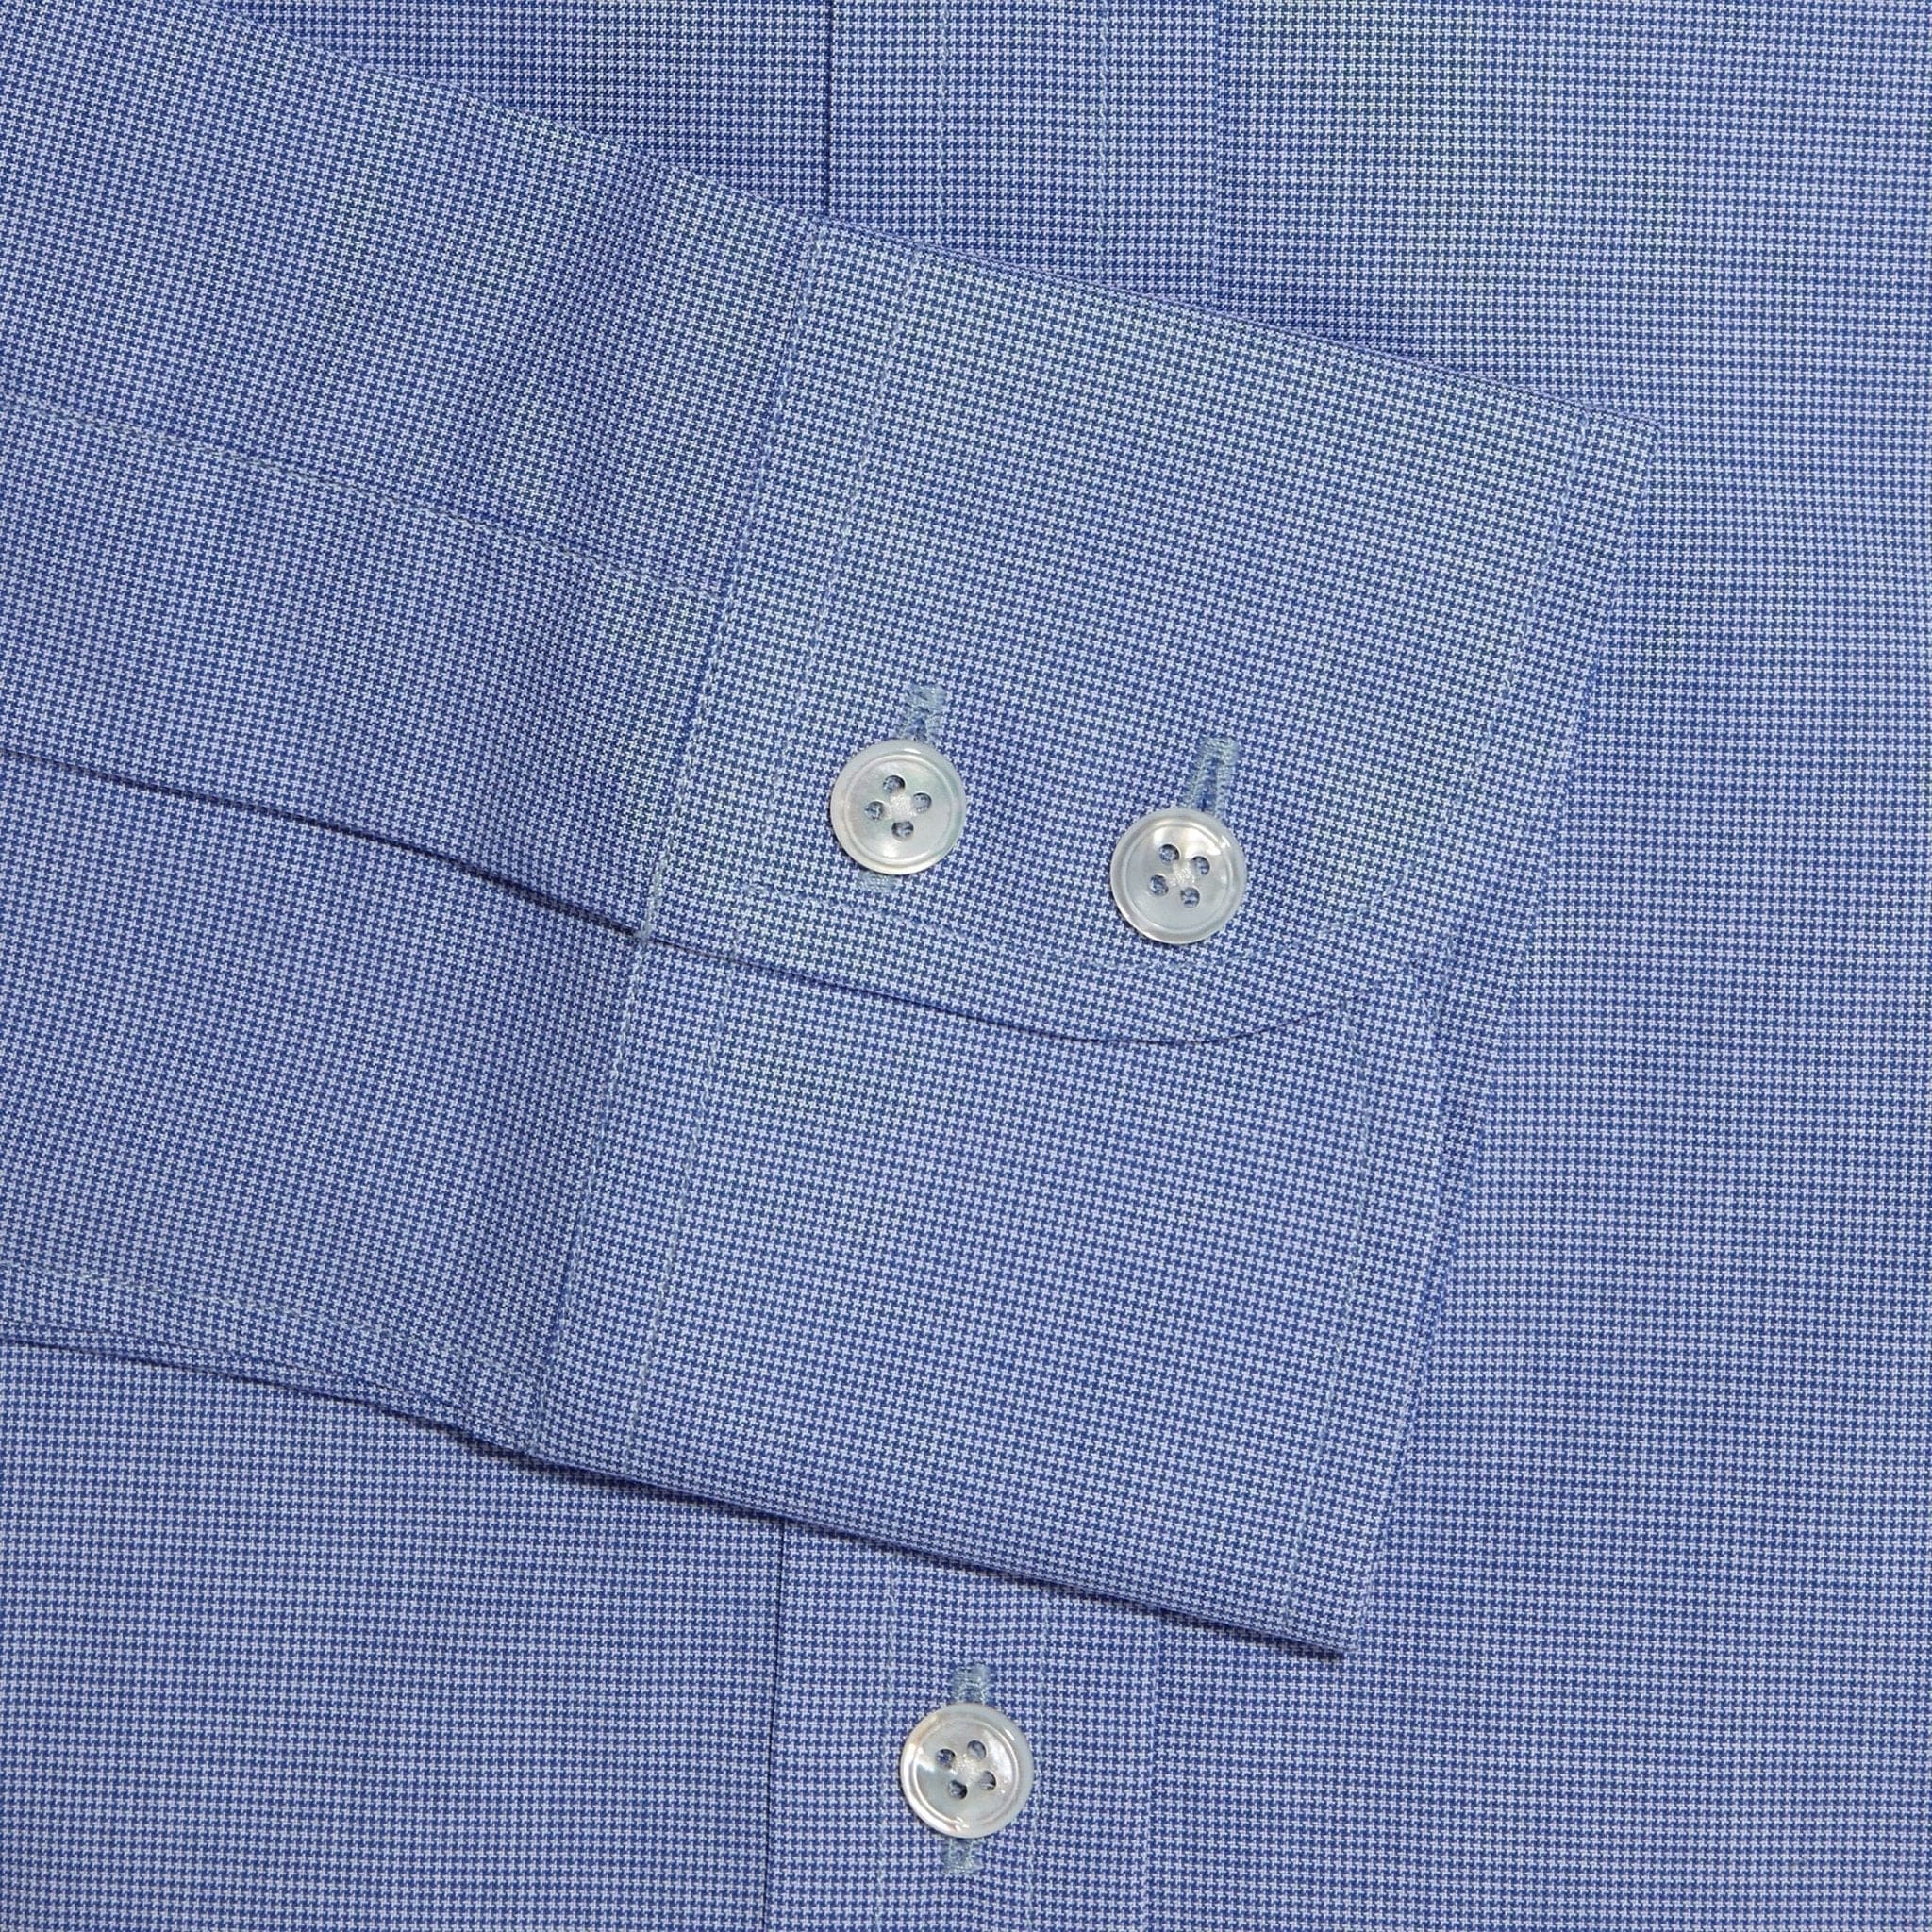 Contemporary Fit, Classic Collar, 2 Button Cuff Shirt in a Plain Navy & White Micro Houndstooth Cotton